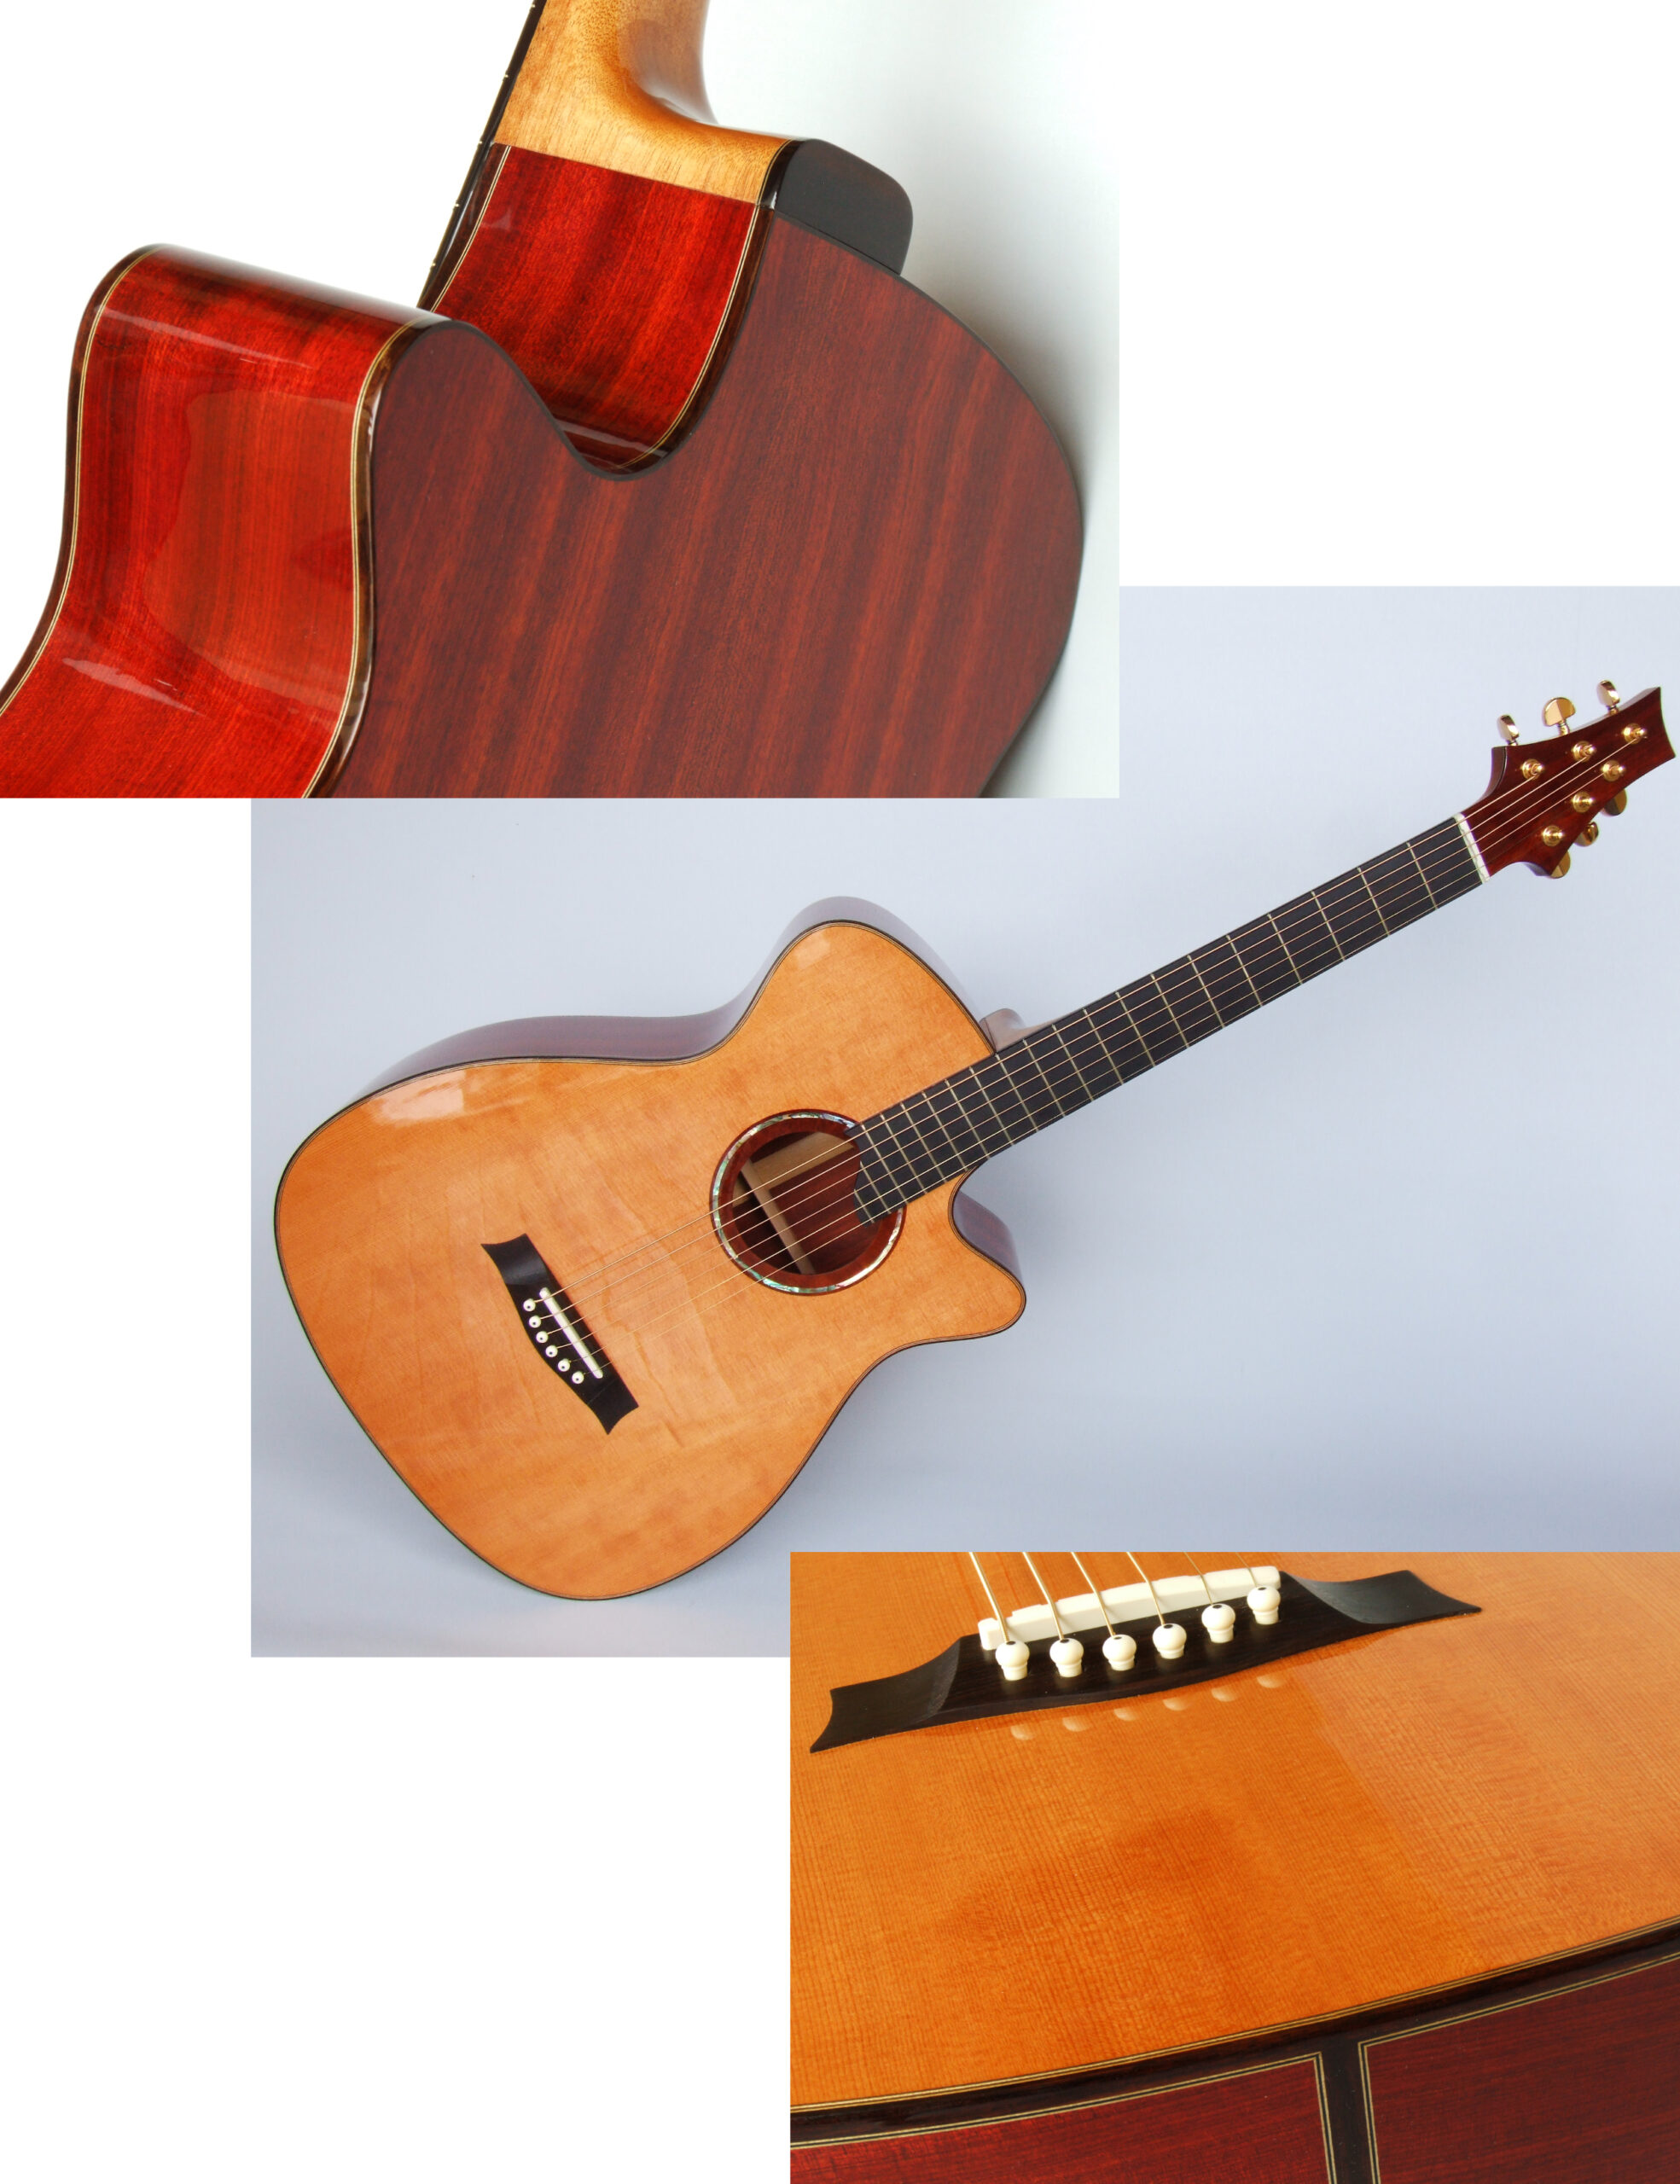 Custom guitars. Collage of red guitar, spruce top, bloodwood back and sides